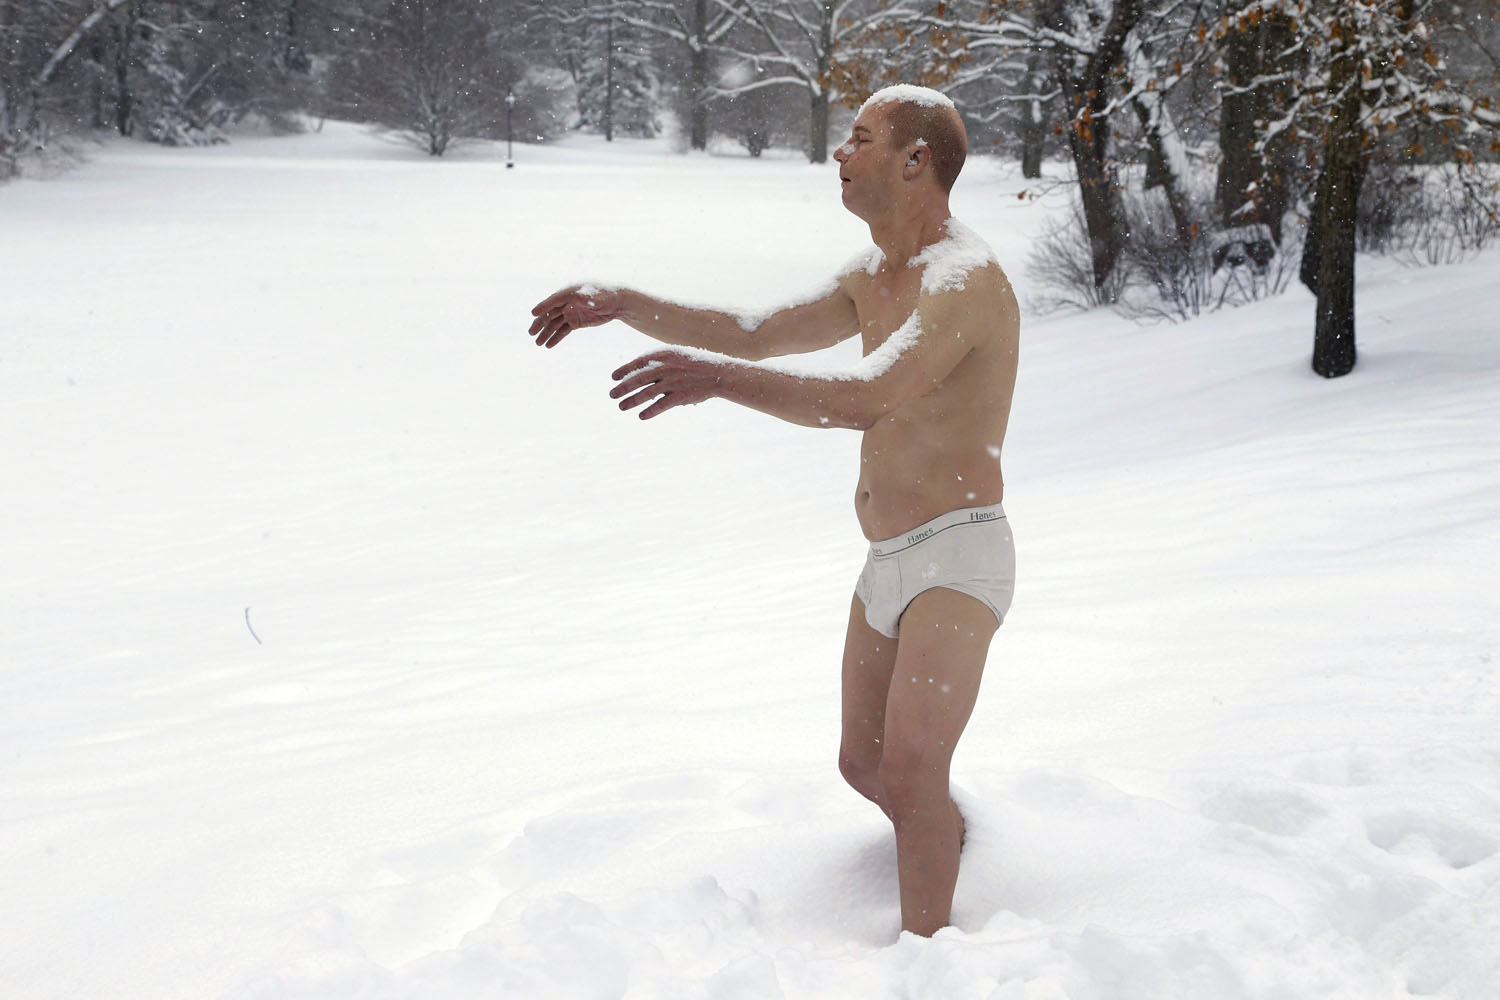 Feb. 5, 2014. A statue of a man sleepwalking in his underpants is surrounded by snow on the campus of Wellesley College, in Wellesley, Mass.